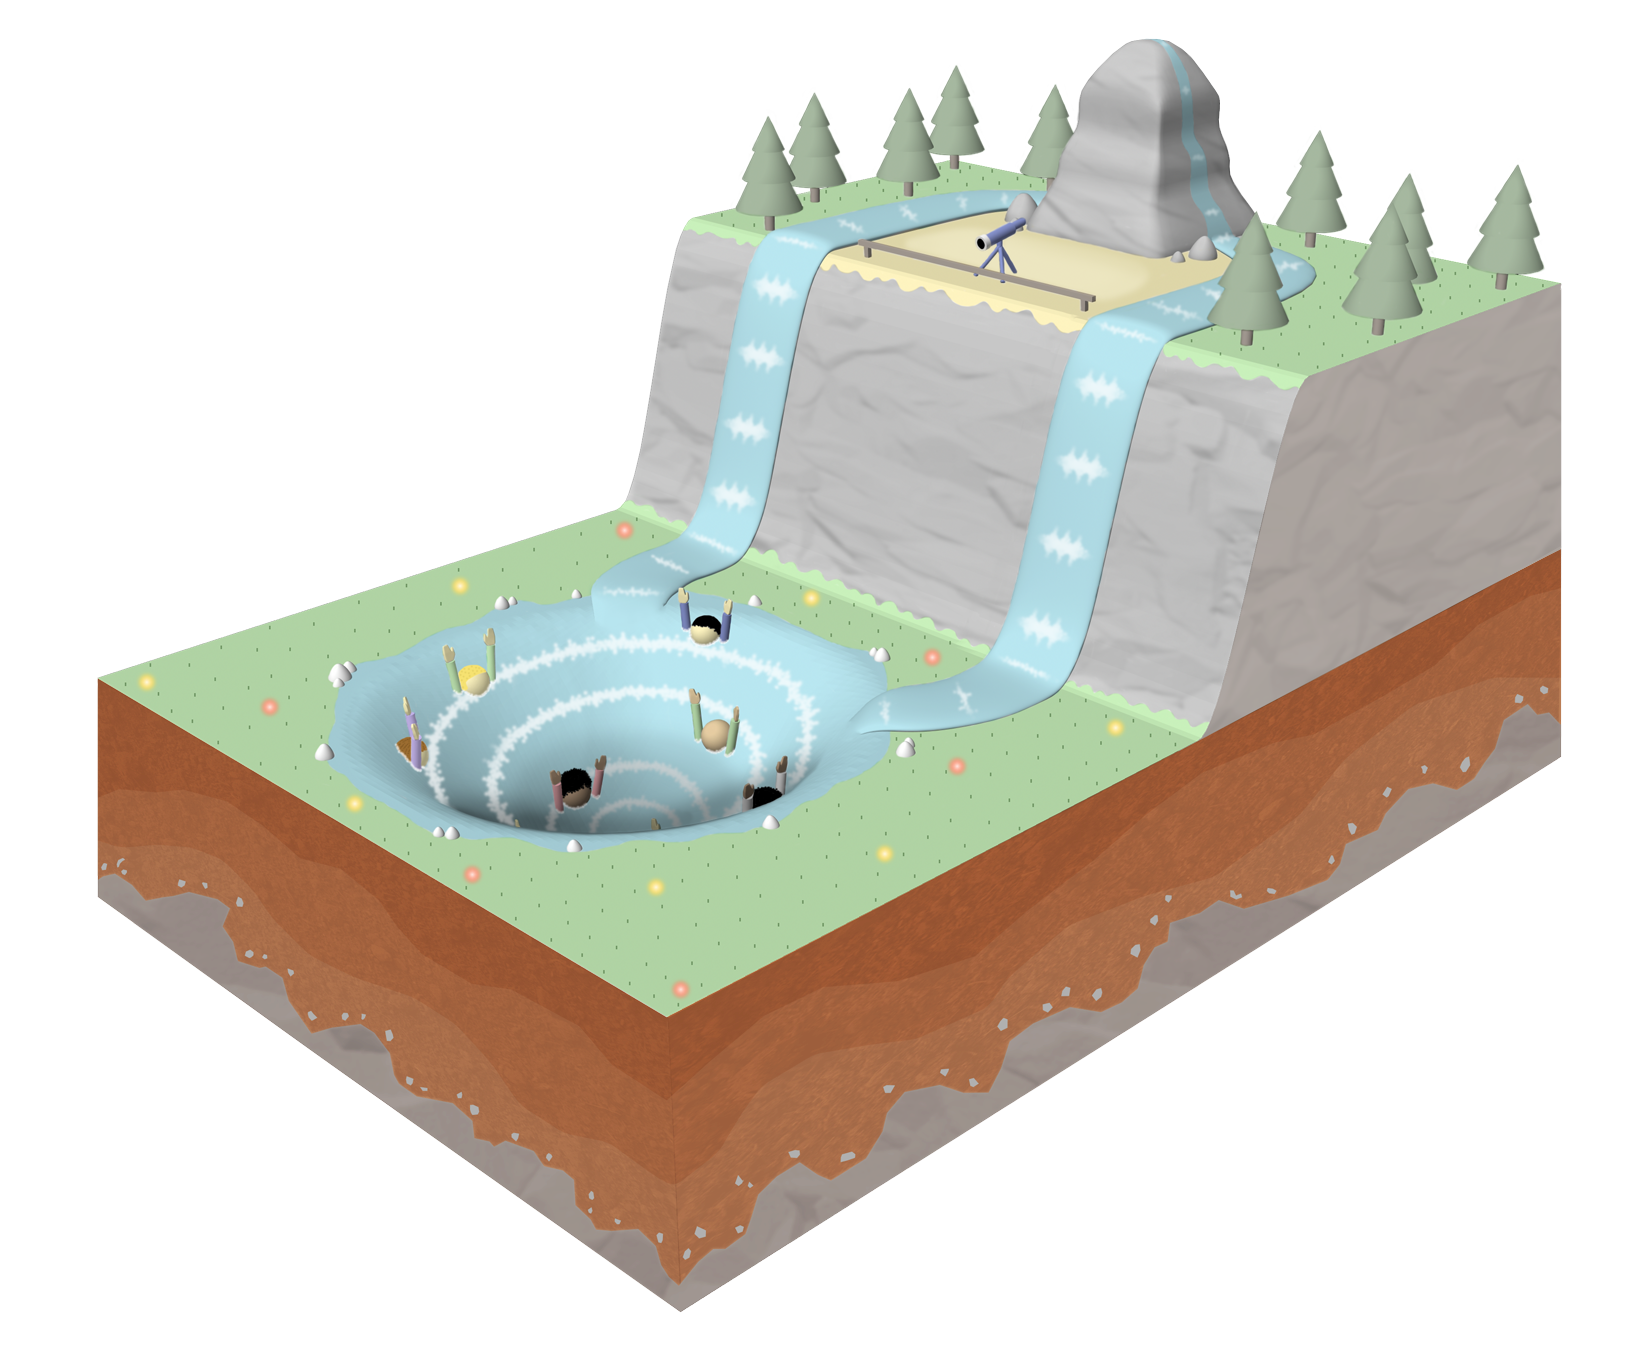 3D illustration of the sculptural cake depicting a landscape with a whirlpool full of drowning people